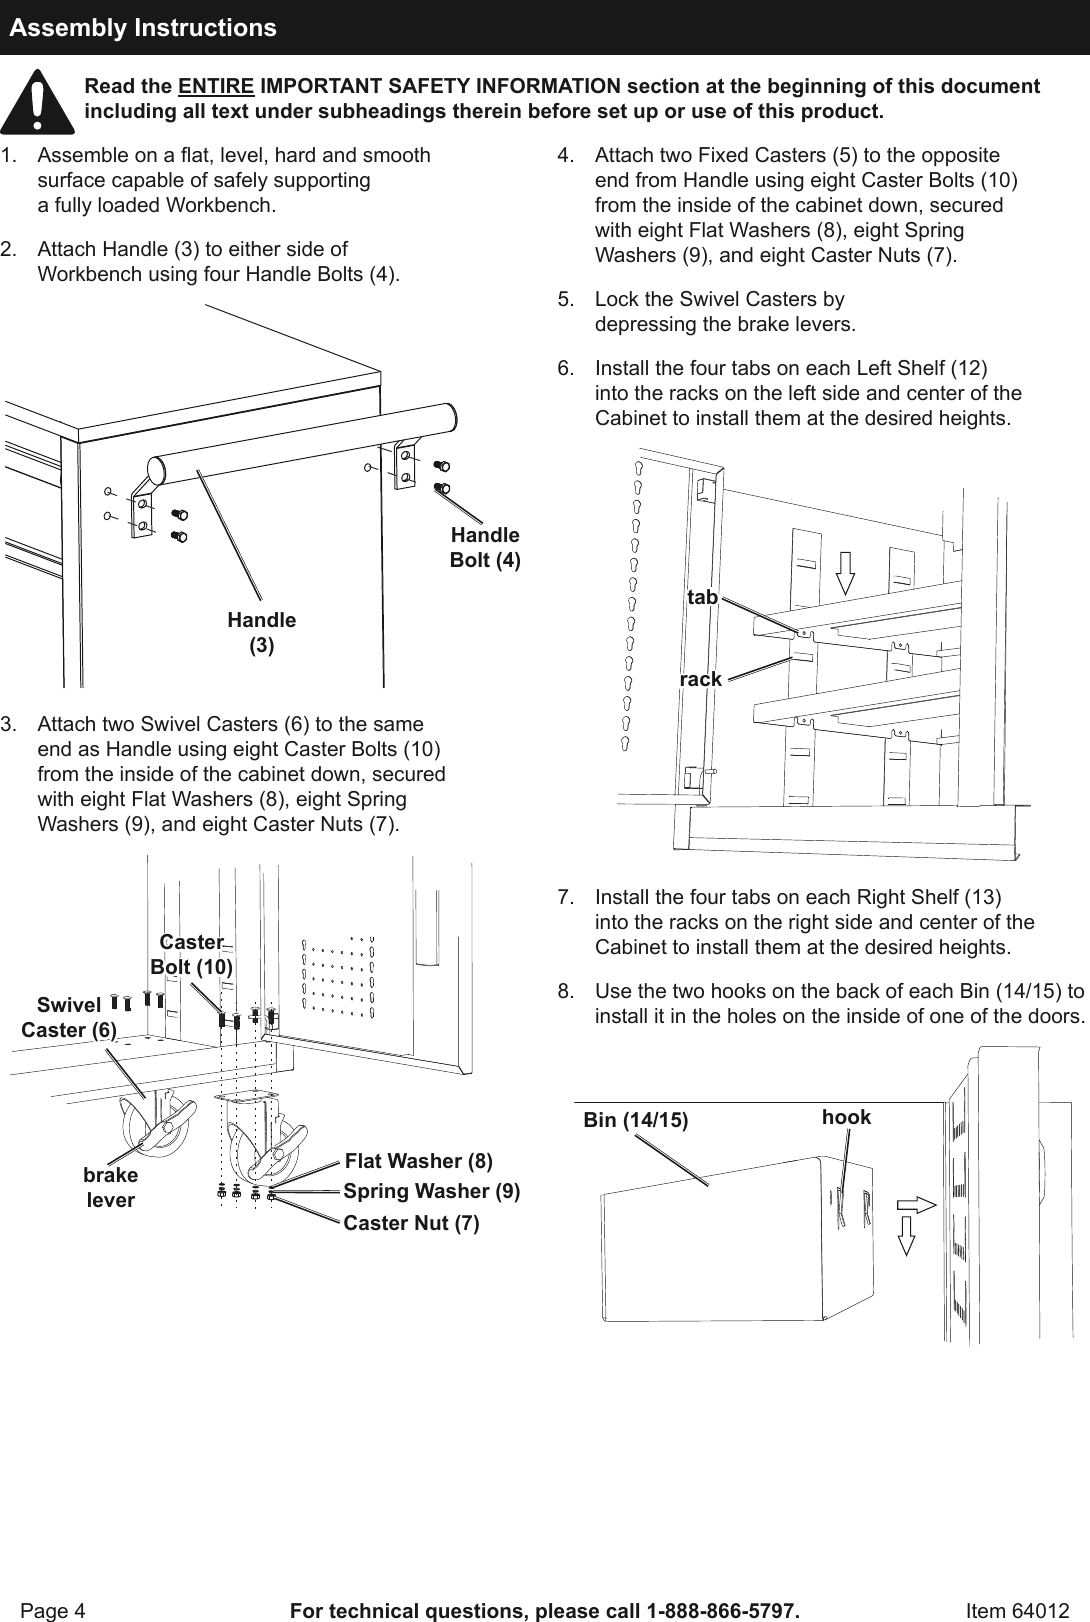 Page 4 of 8 - Manual For The 64012 46 In. Mobile Workbench With Solid Wood Top